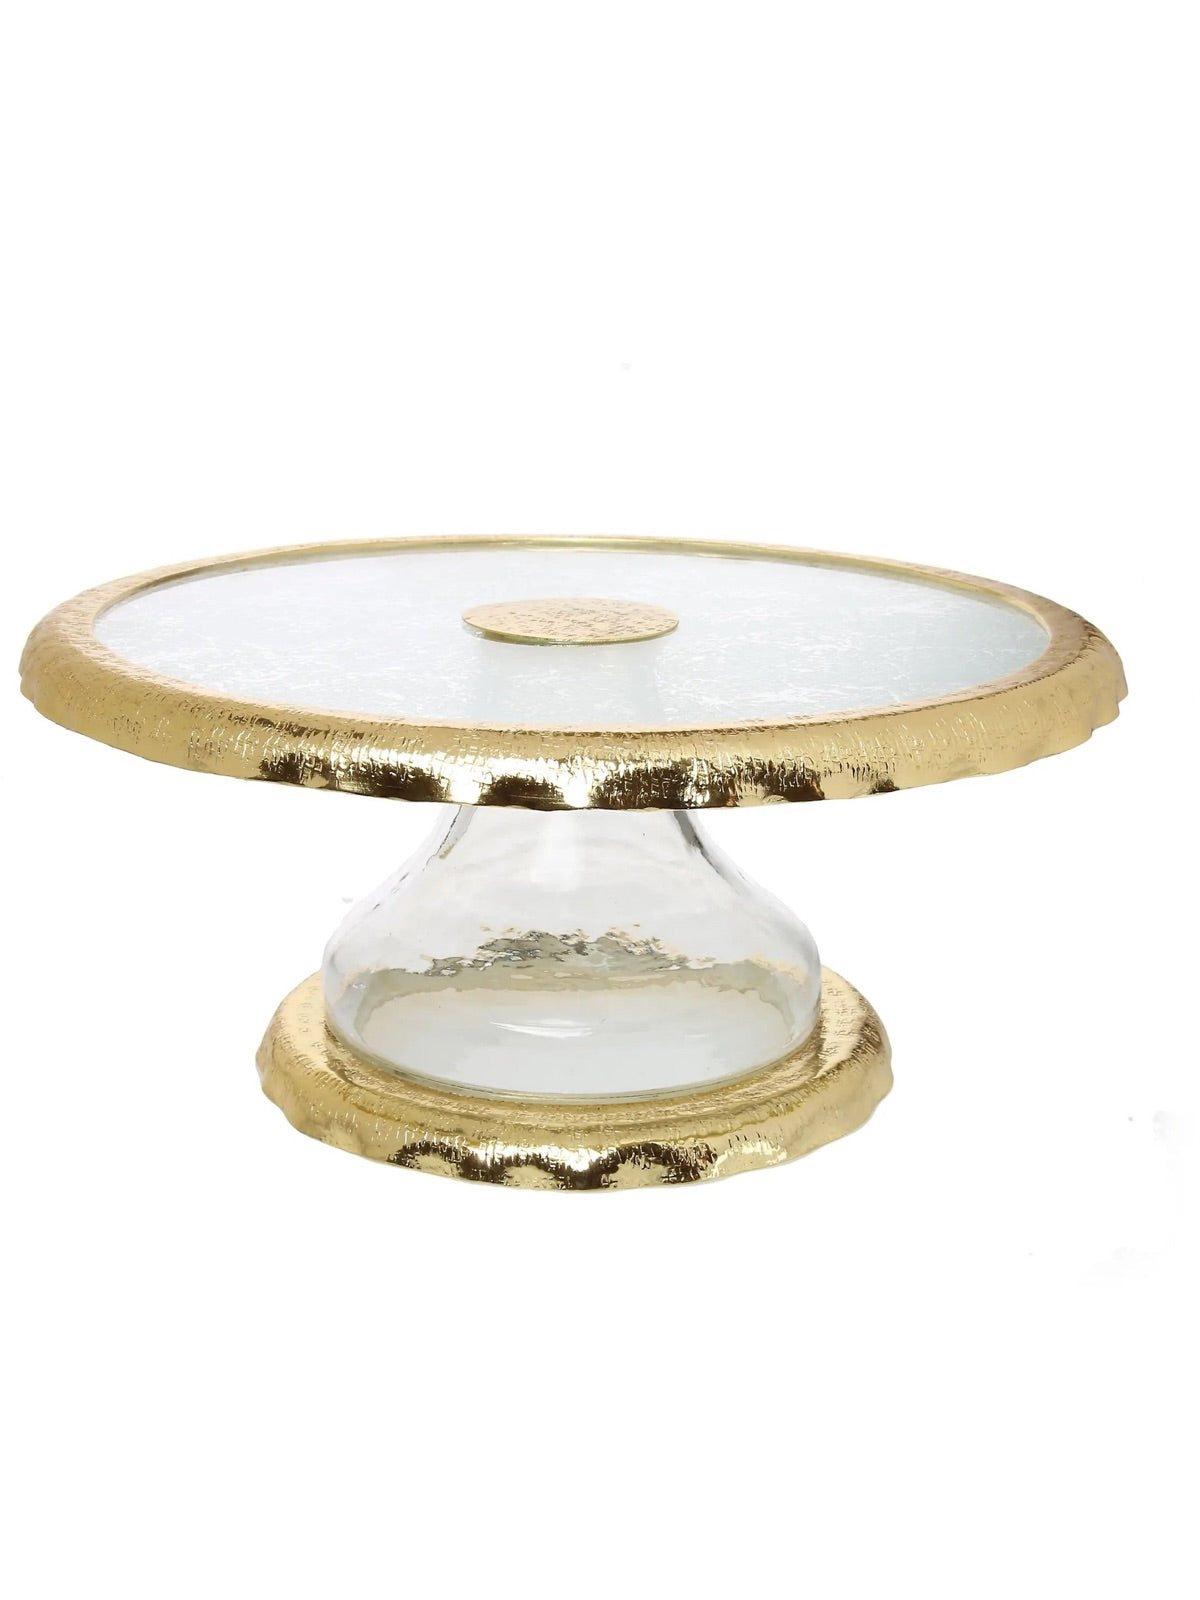 Luxurious Glass Cake Stand with Stainless Steel Gold Scalloped Edges Sold by KYA Home Decor.